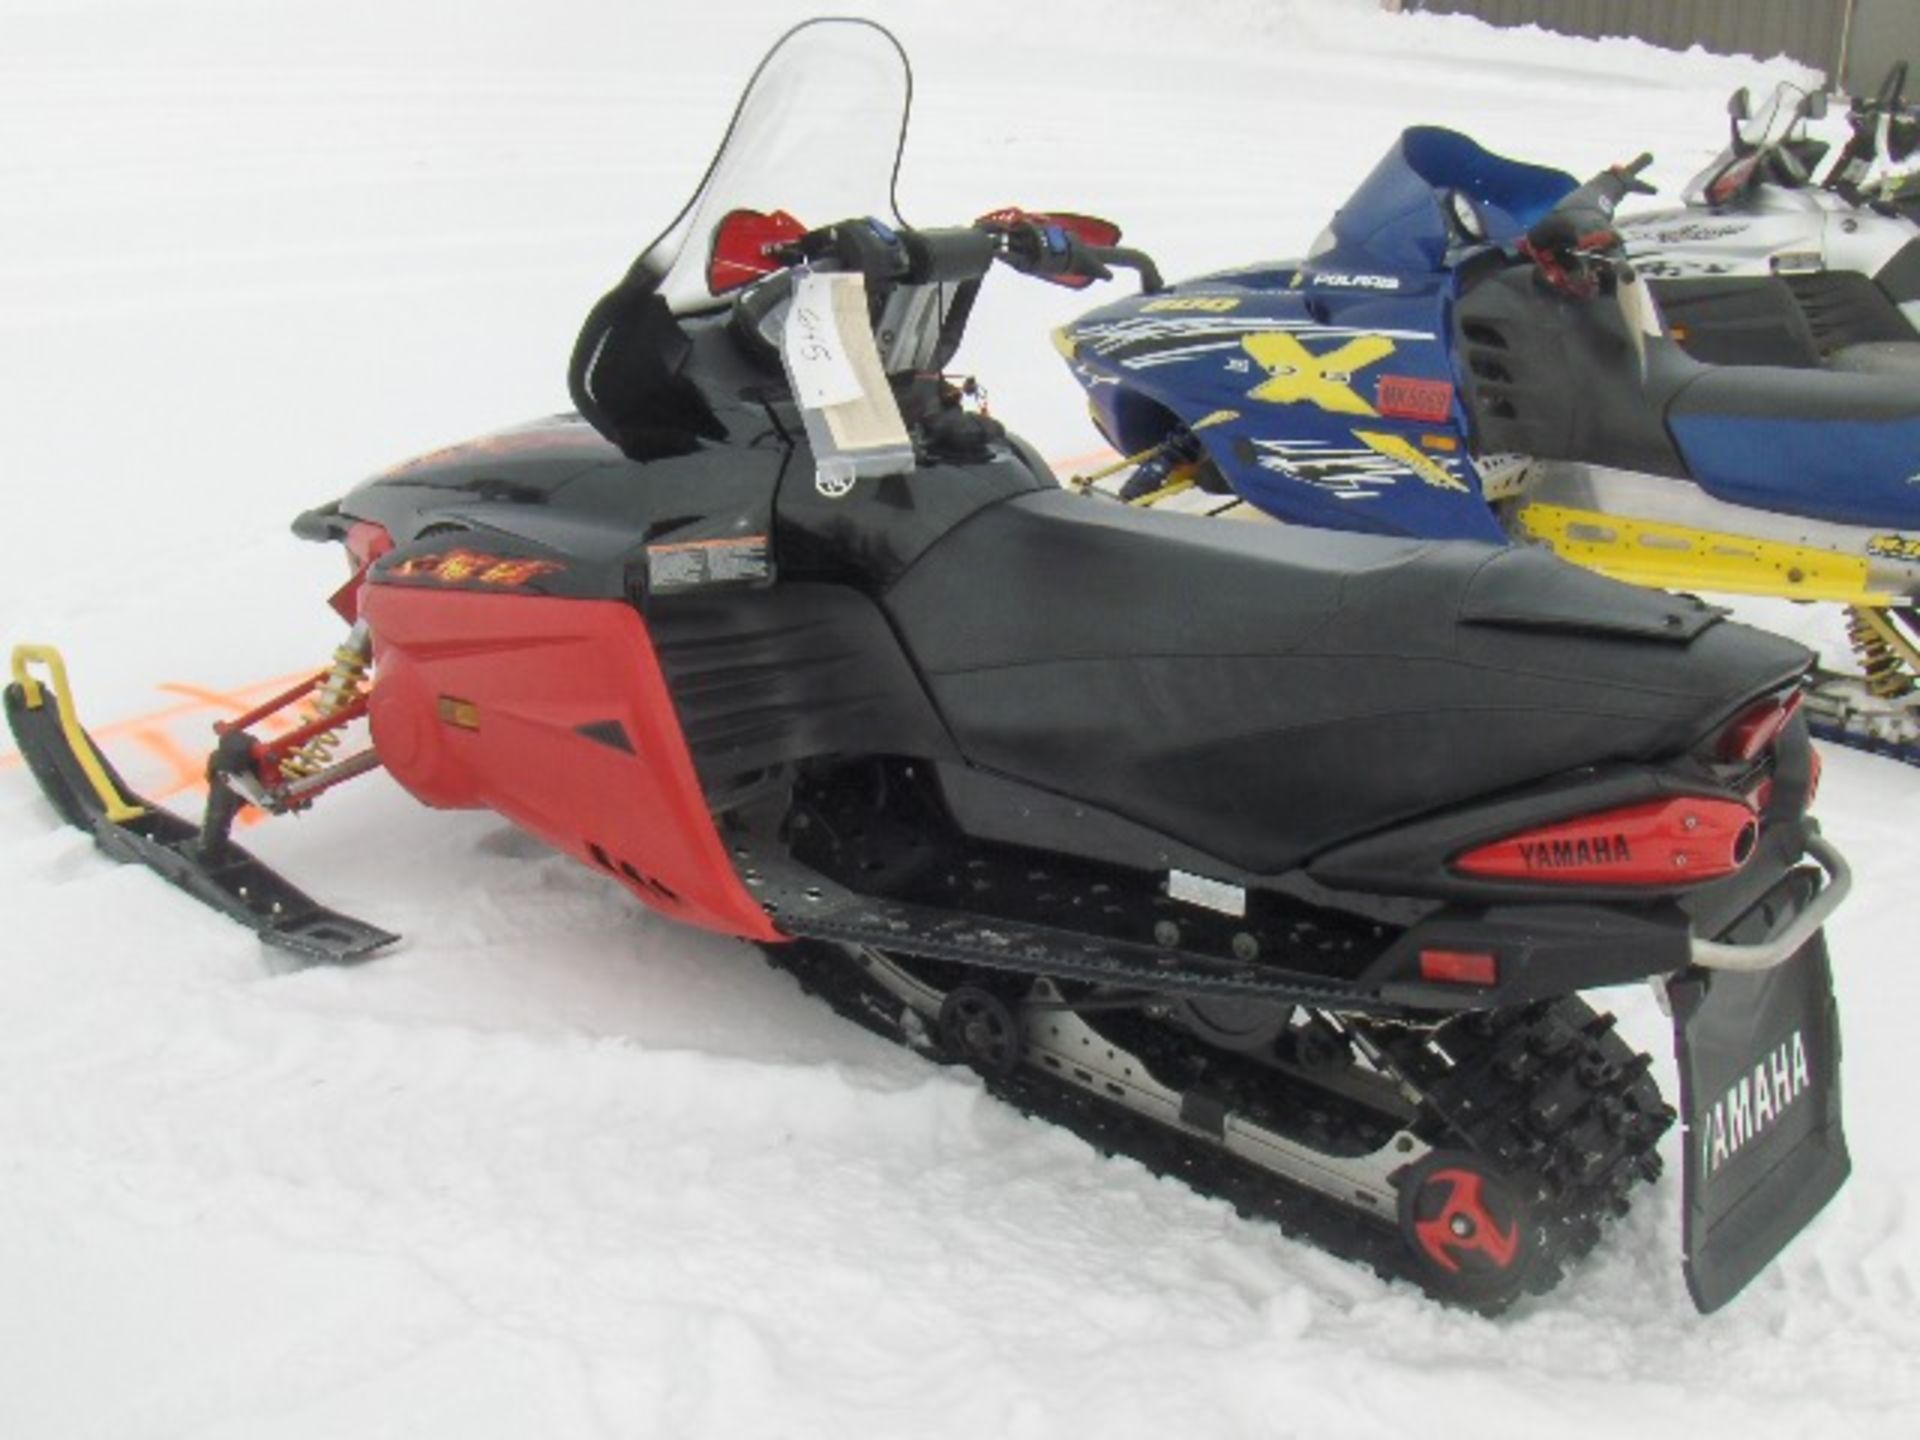 2007 YAMAHA NYTRO  JYE8GH0087A003918 snowmobile, owner started at time of auction check in, electric - Image 4 of 4